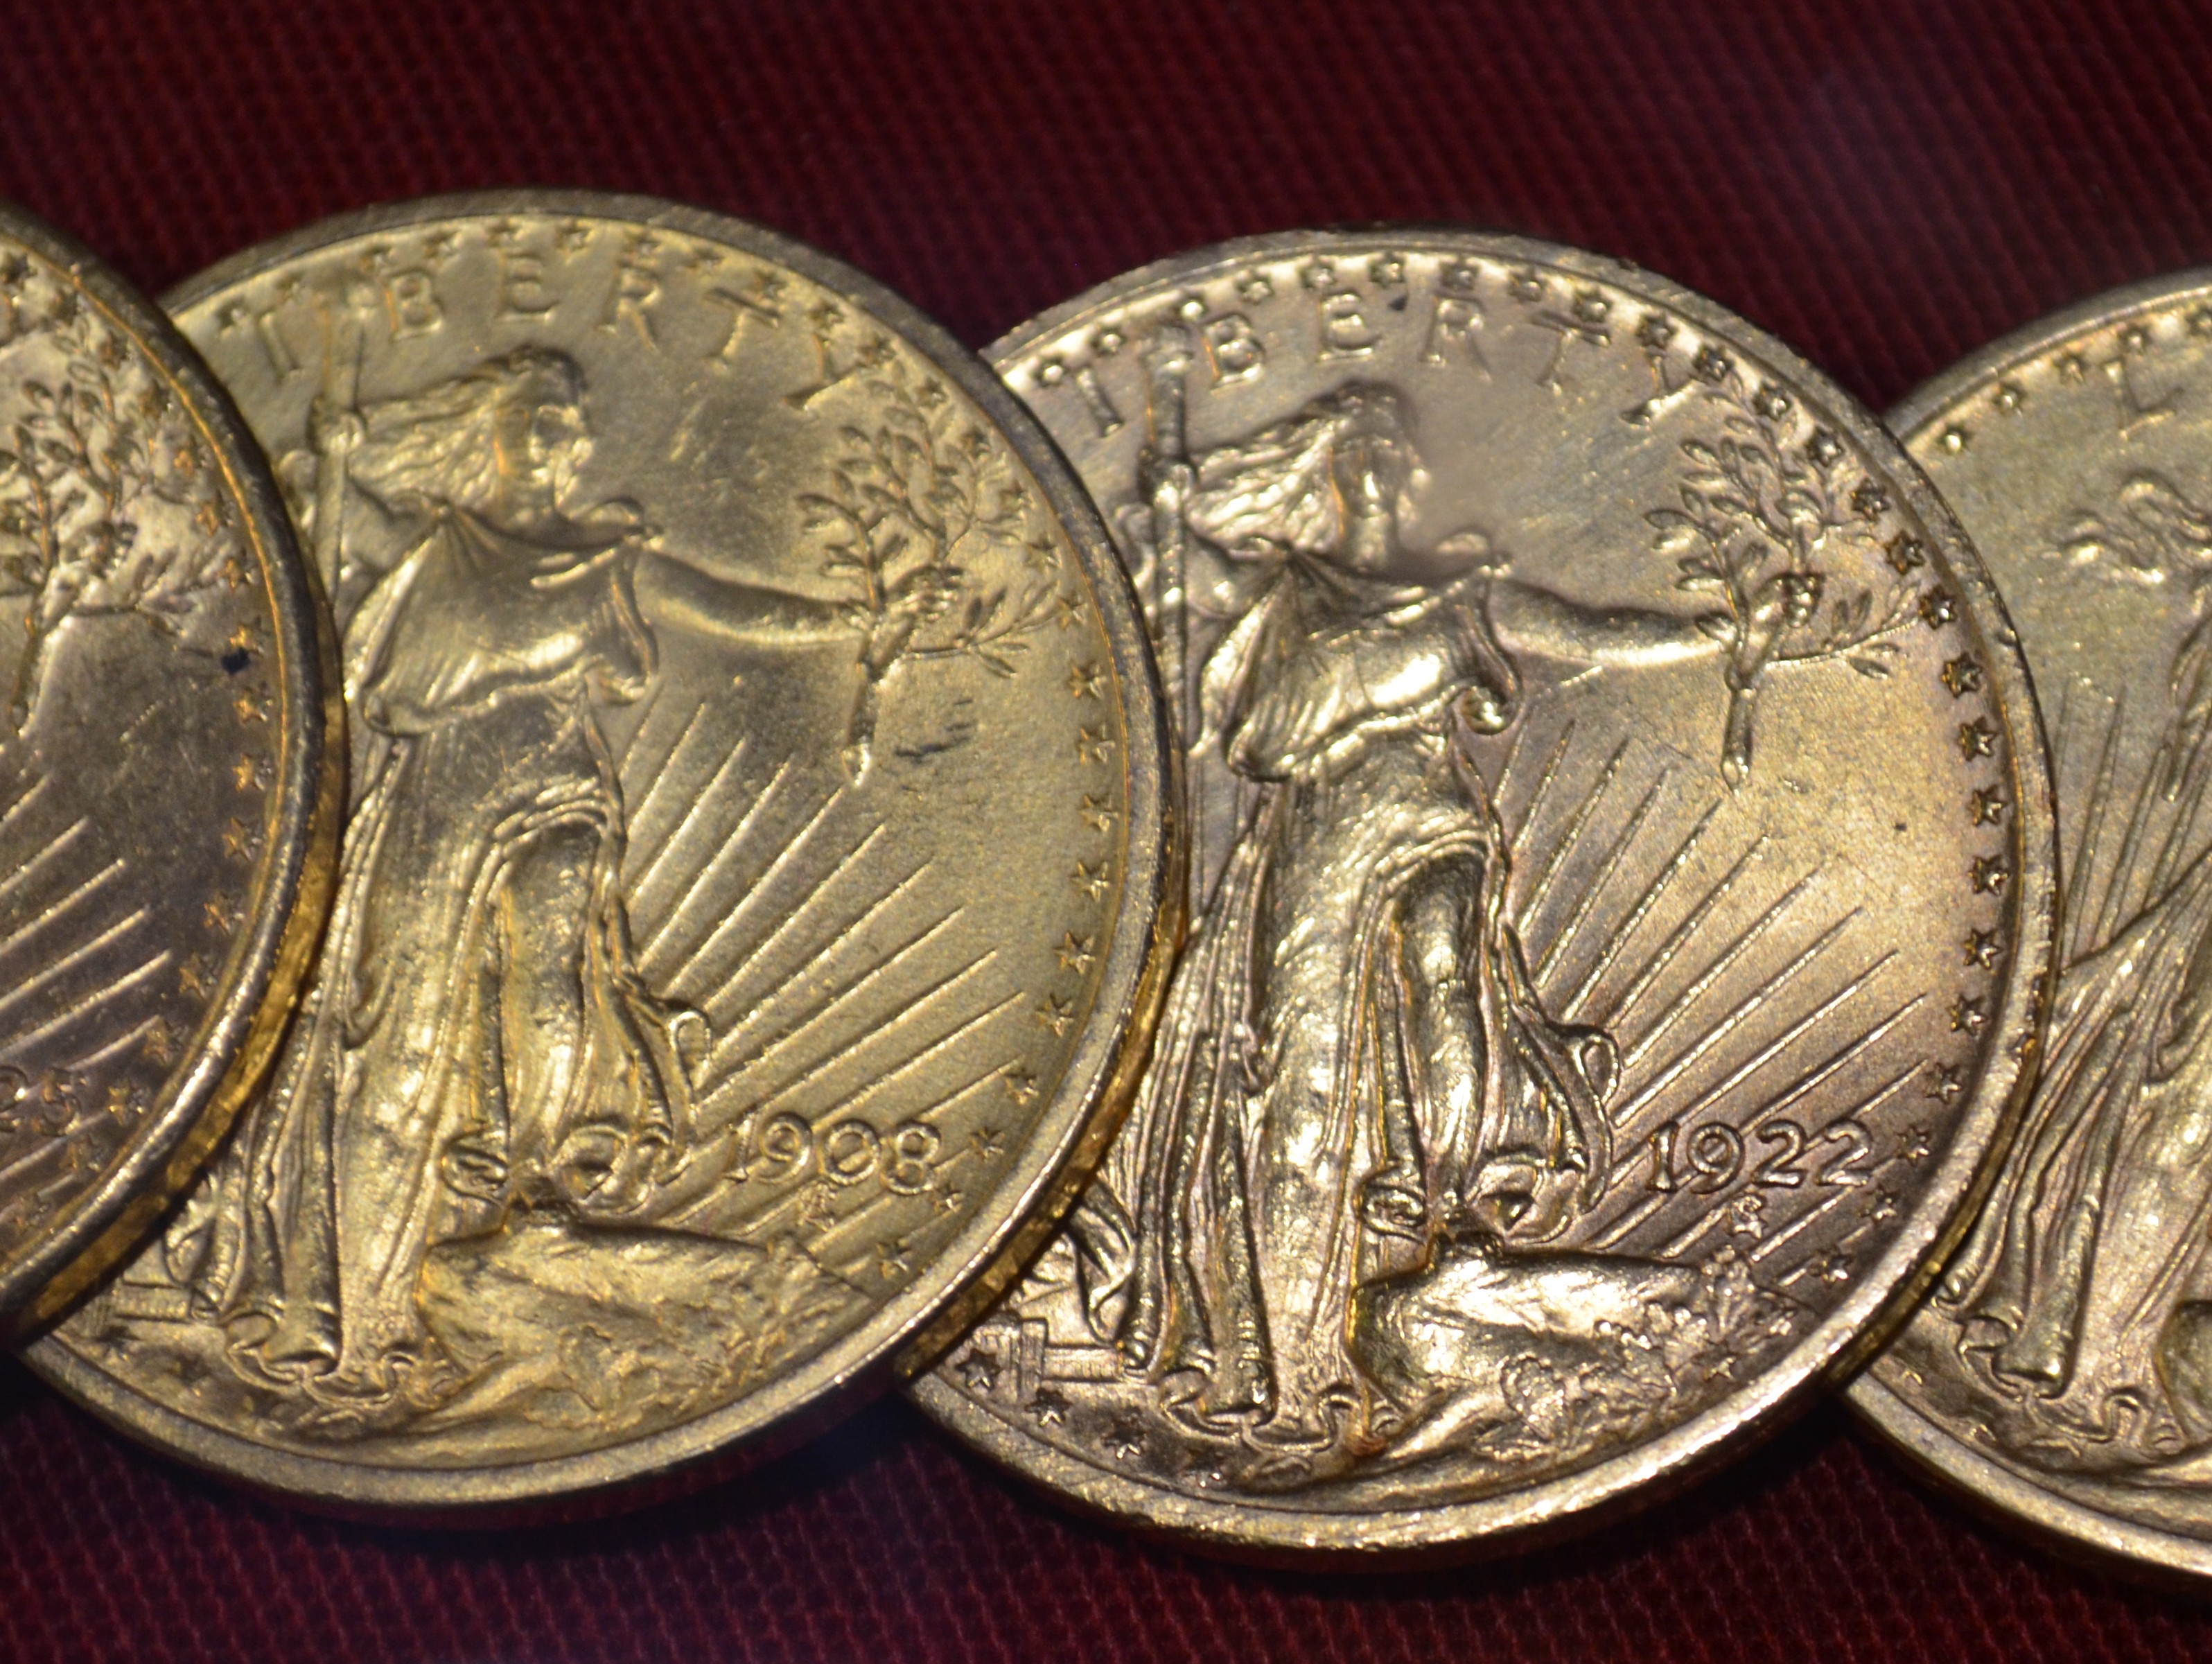 Buy and sell gold and silver coins and rare paper money at the PNG/ANA Numismatic Trade Show, August 8 - 2015, at the Donald E. Stephens Convention Center in Rosemont, Illinois.